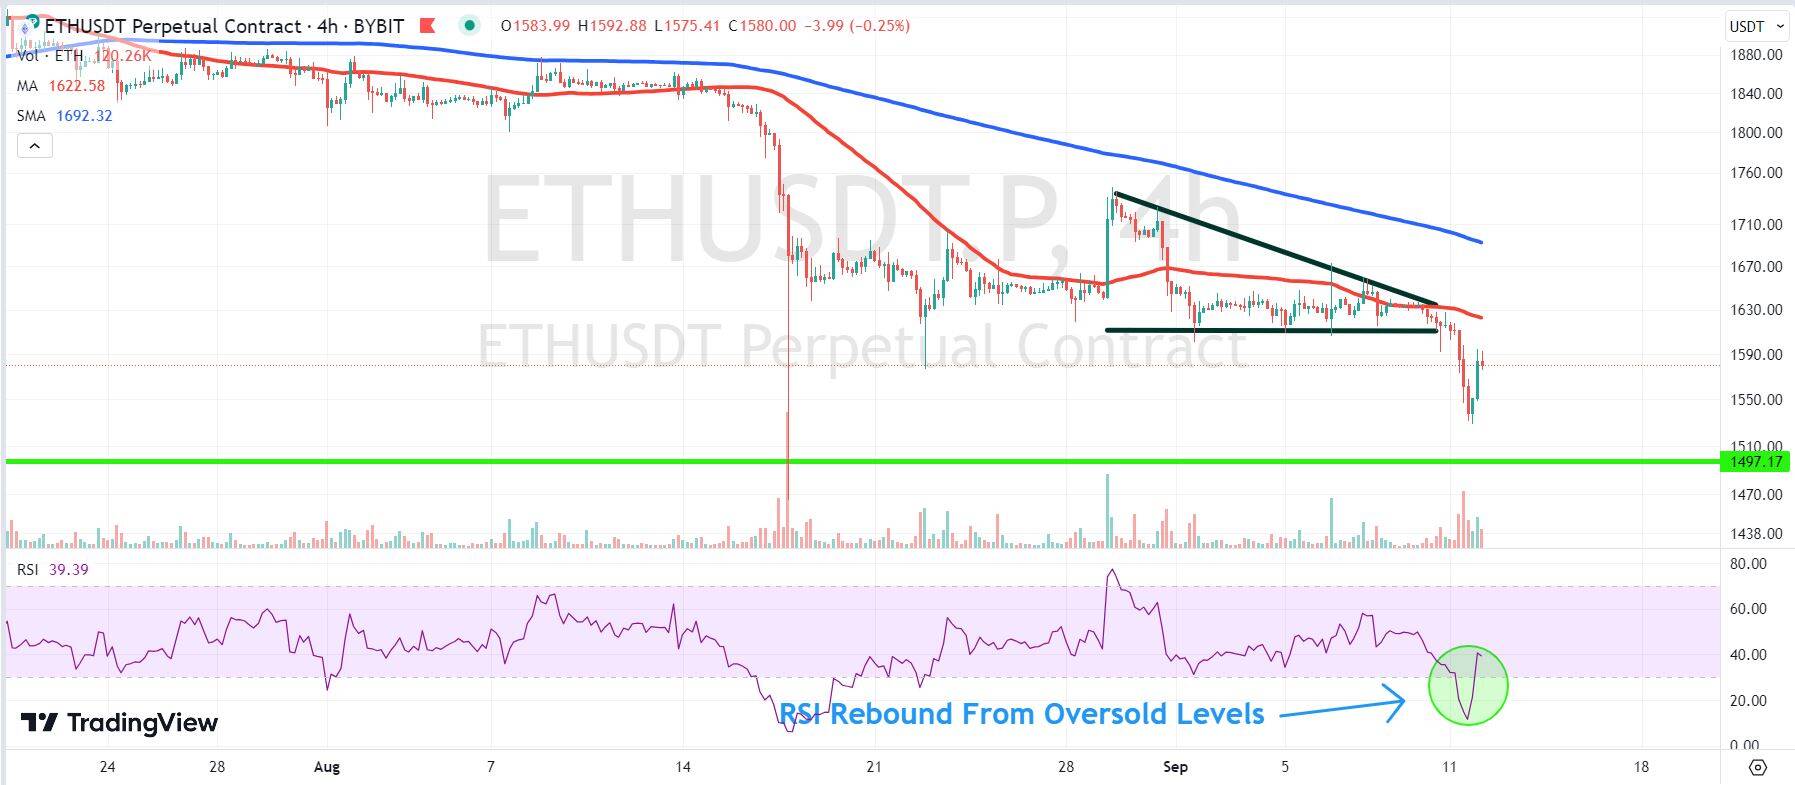 Chart depicting the ETH price.